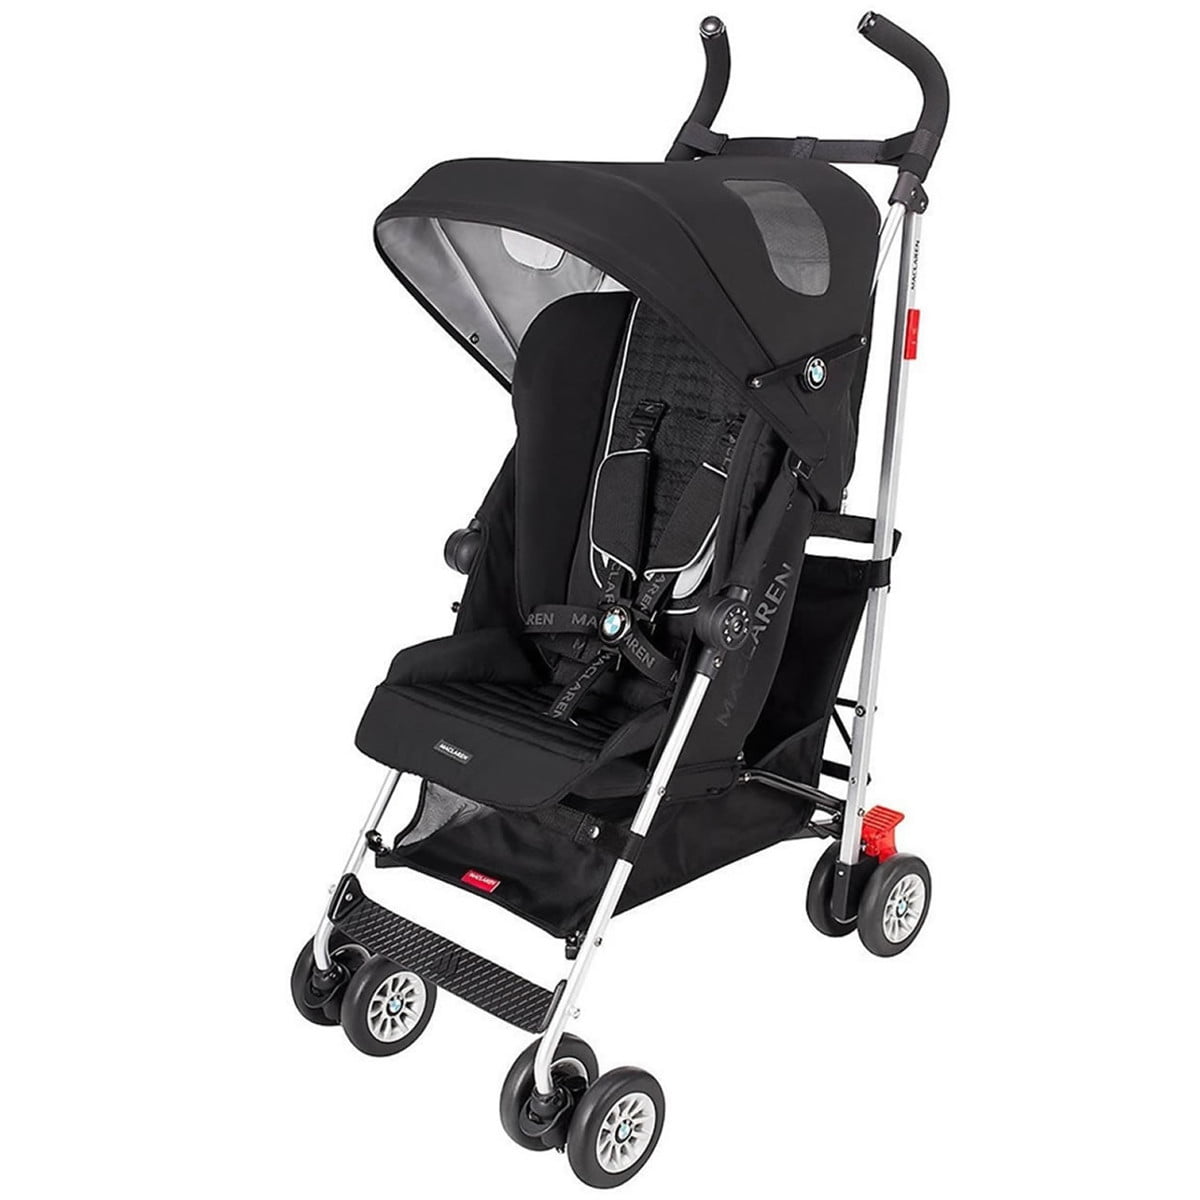 black buggies and strollers